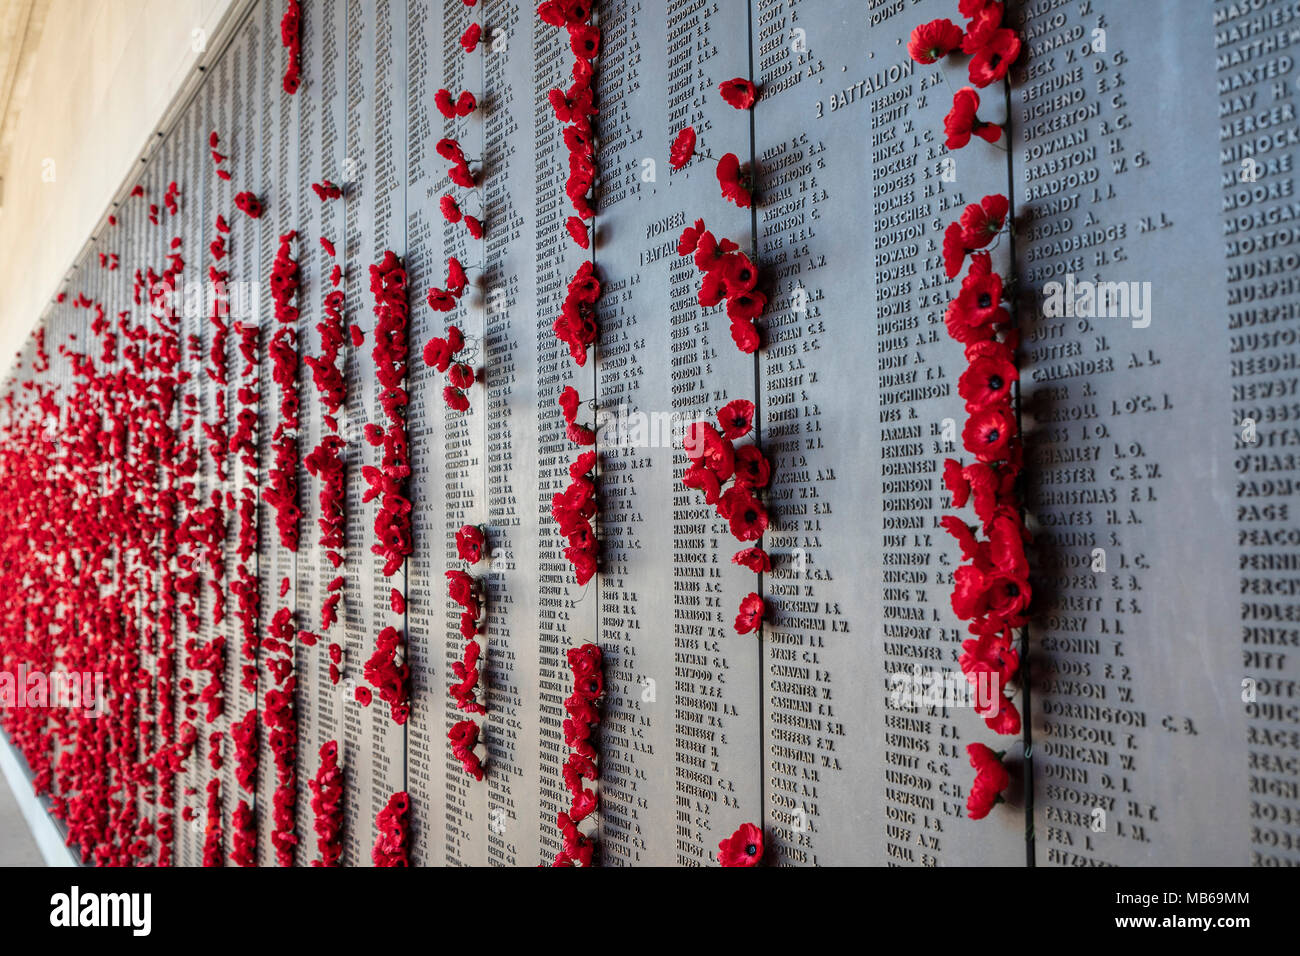 Red poppies pinned next to names of deceased soldiers at Australian War Memorial, Canberra, Australia Stock Photo